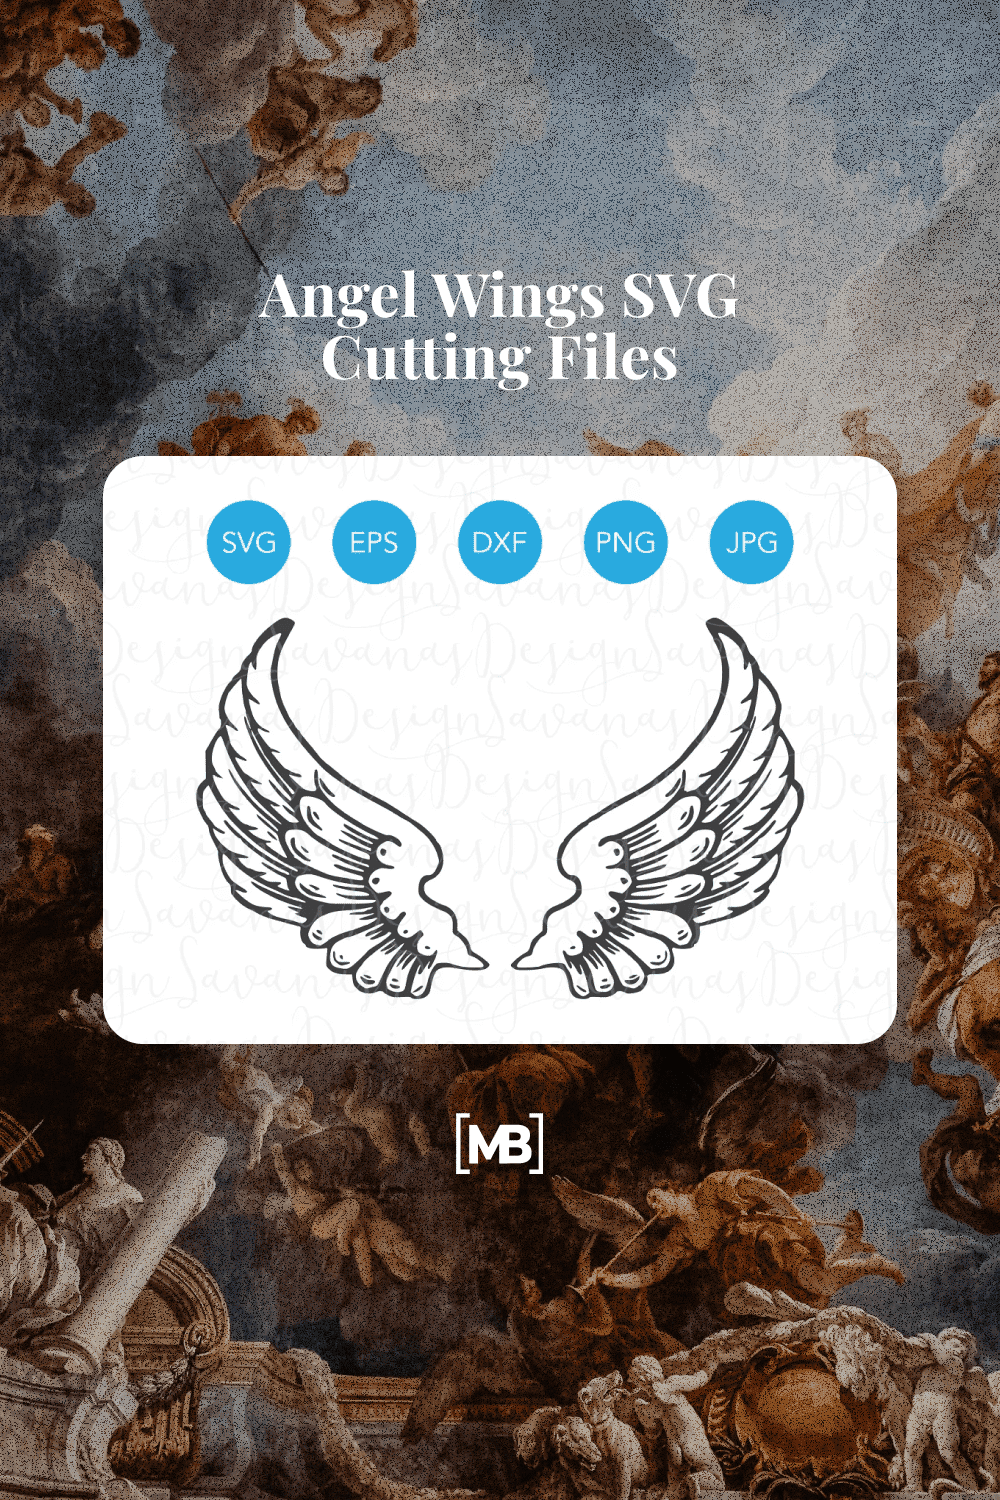 Image of angel wings with good drawing.